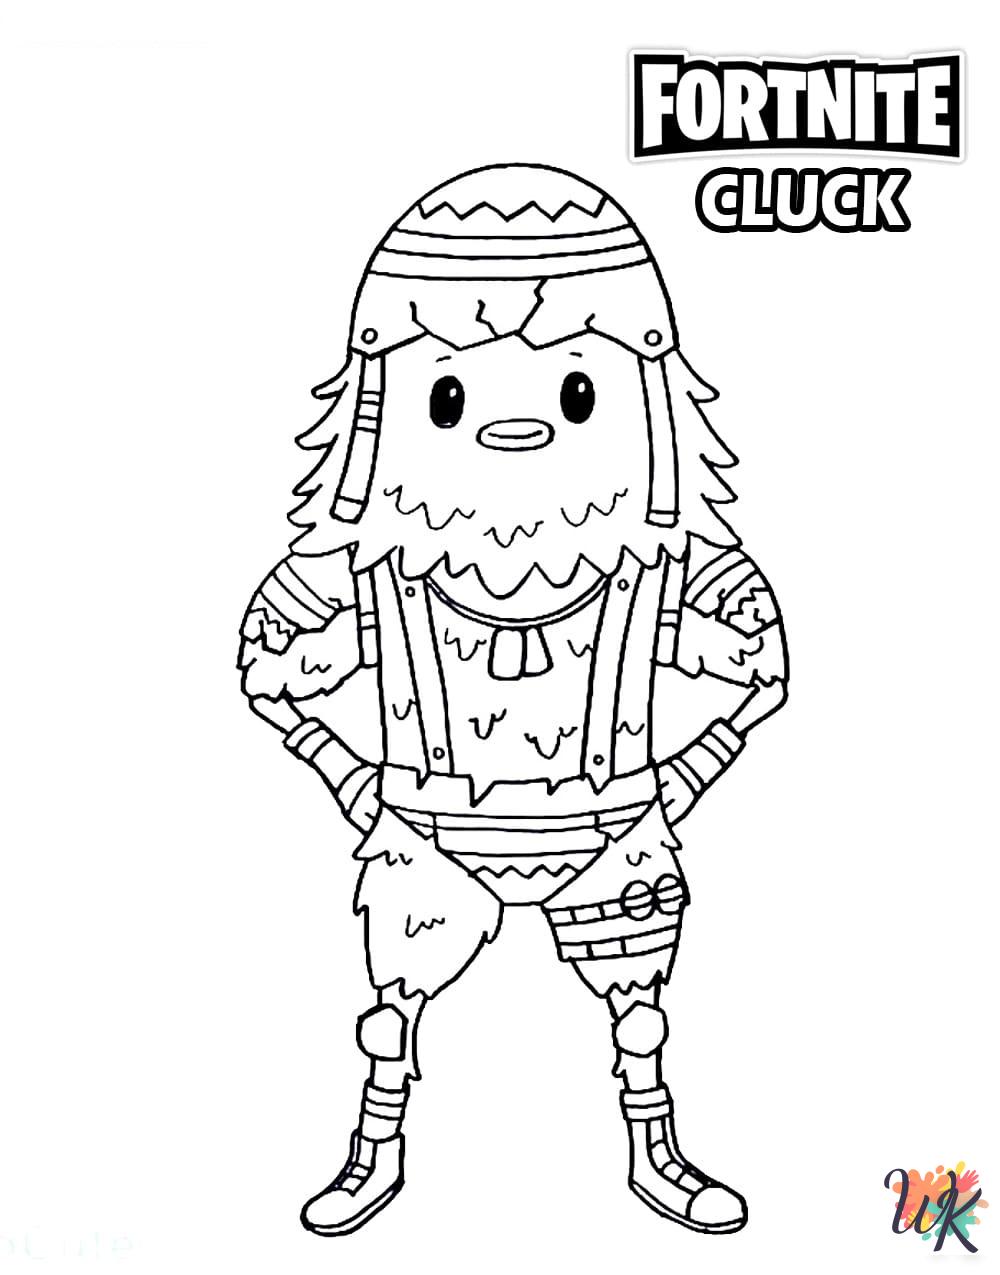 Fornite coloring pages printable